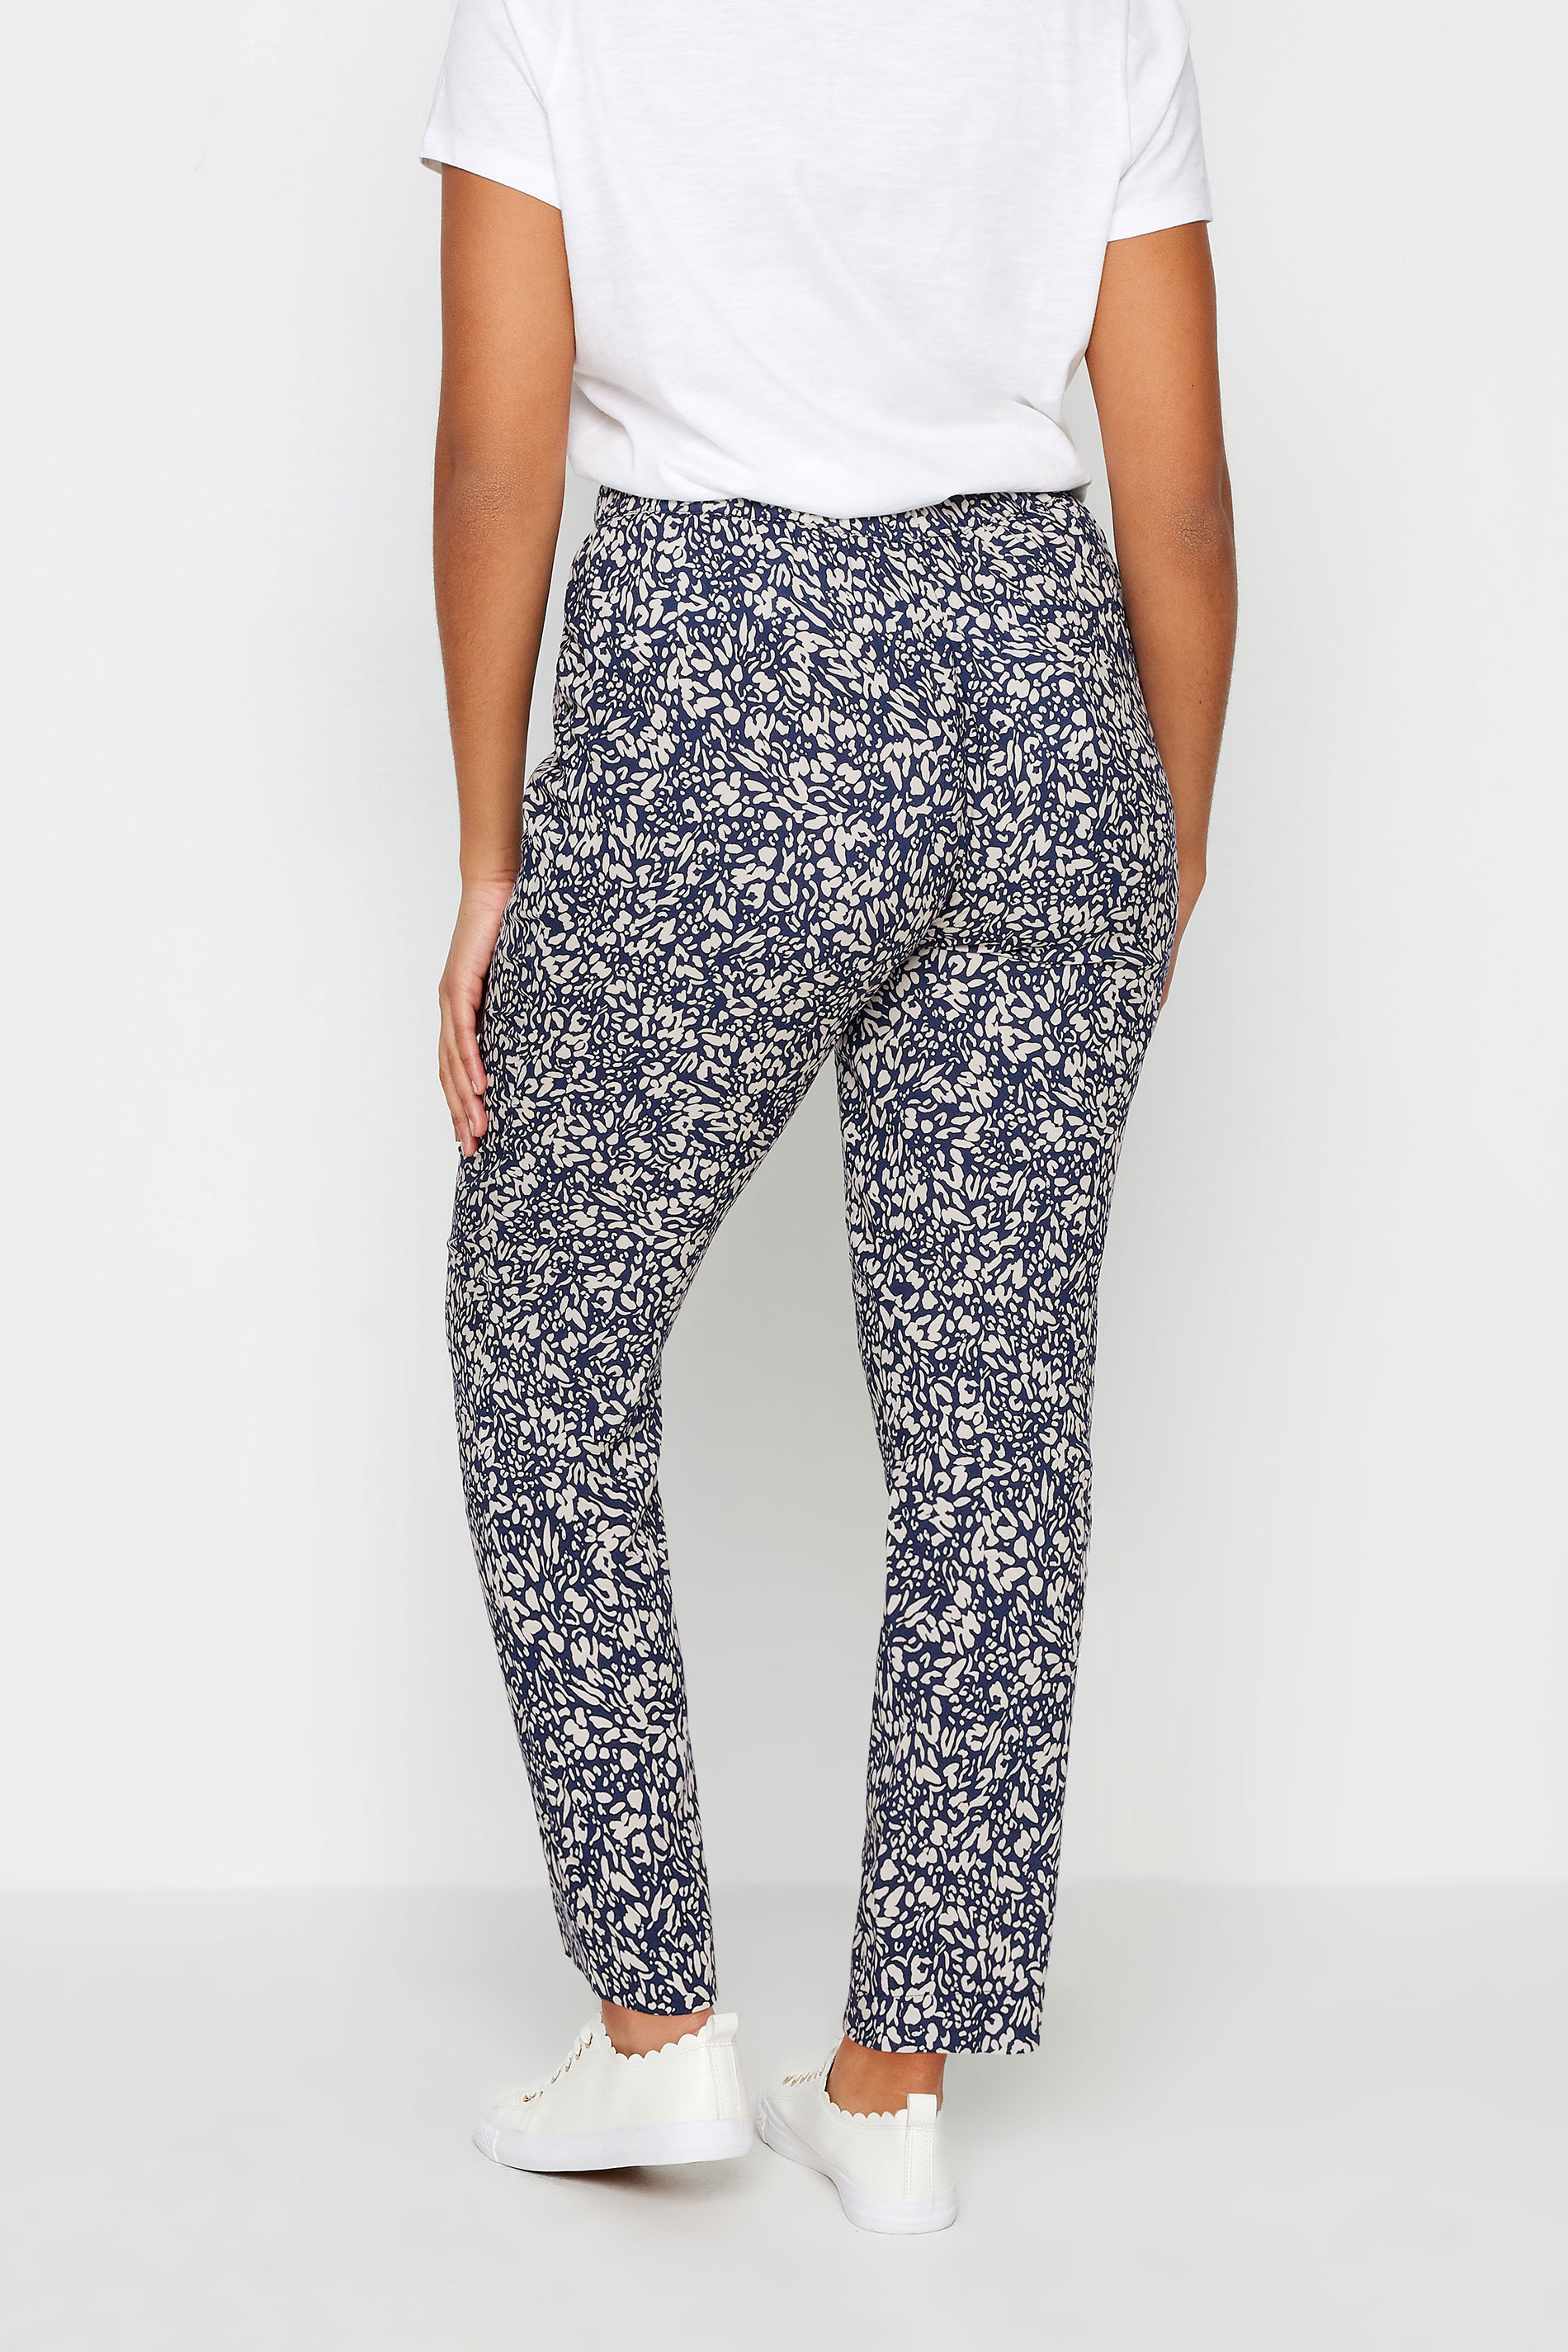 M&Co Navy Blue & Ivory Markings Print Trousers | M&Co